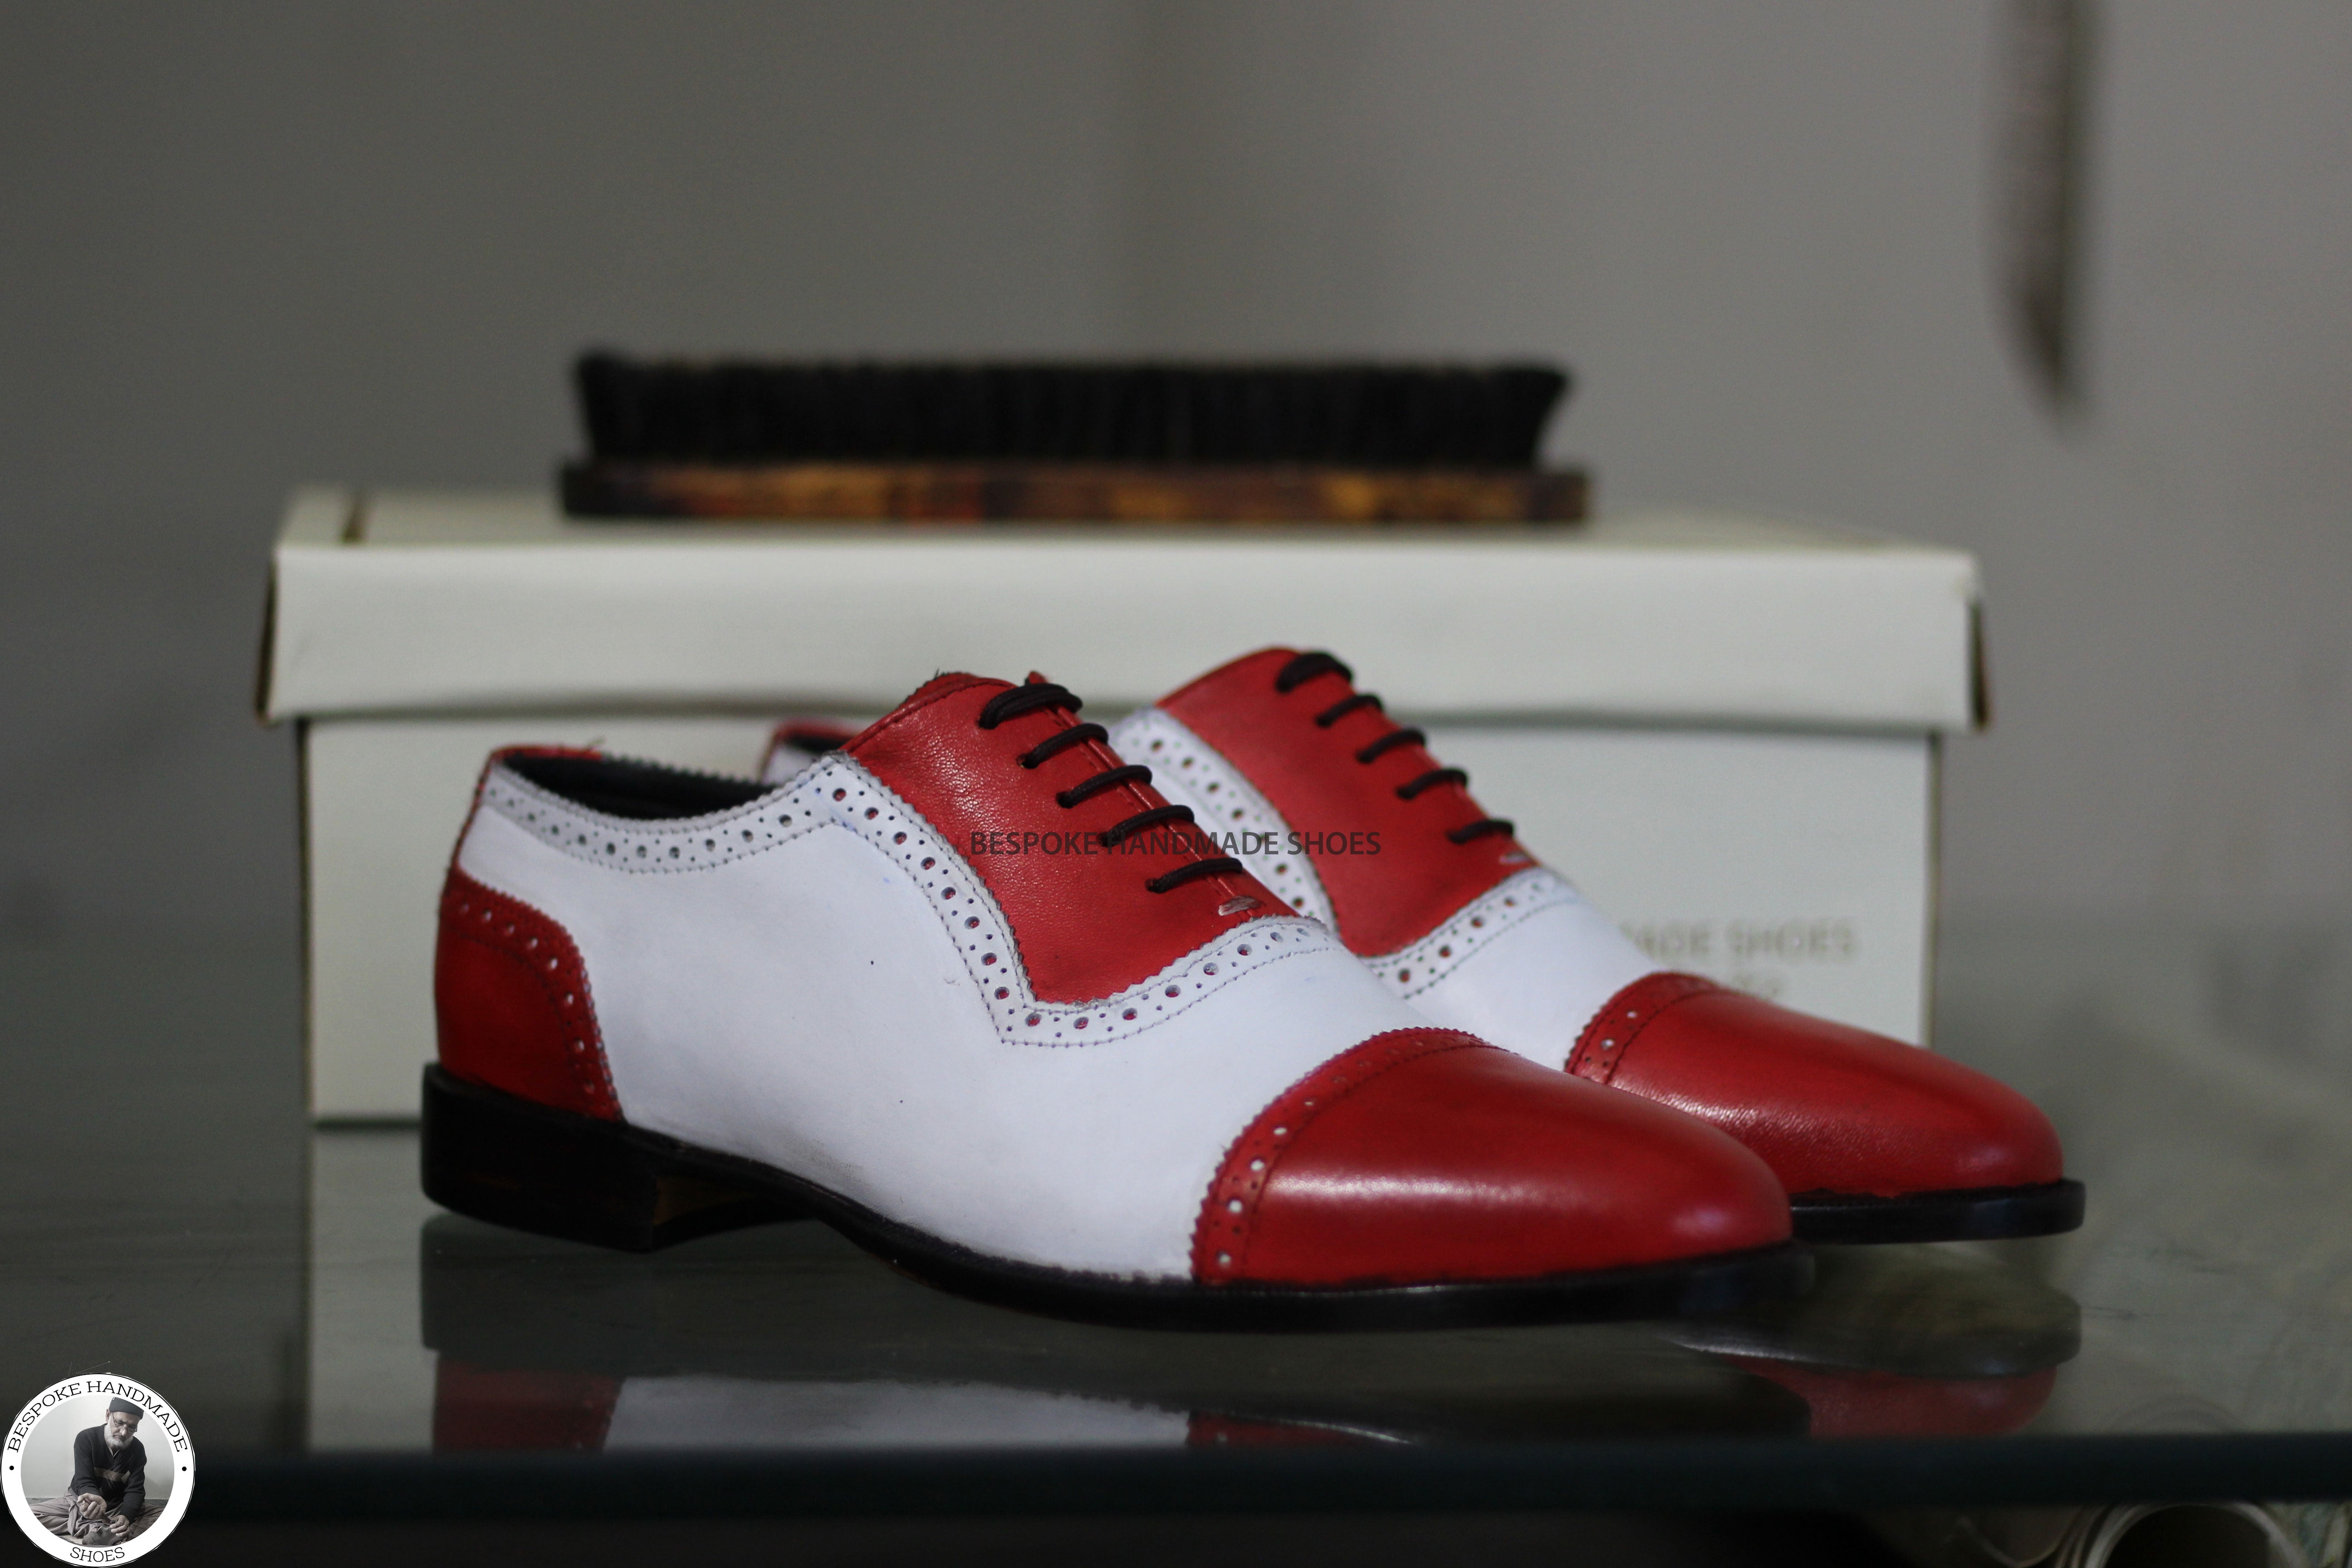 Copy of New Men's Handmade White & Red Color Leather Toe Cap Oxford Lace Up Designer Shoes For Men's